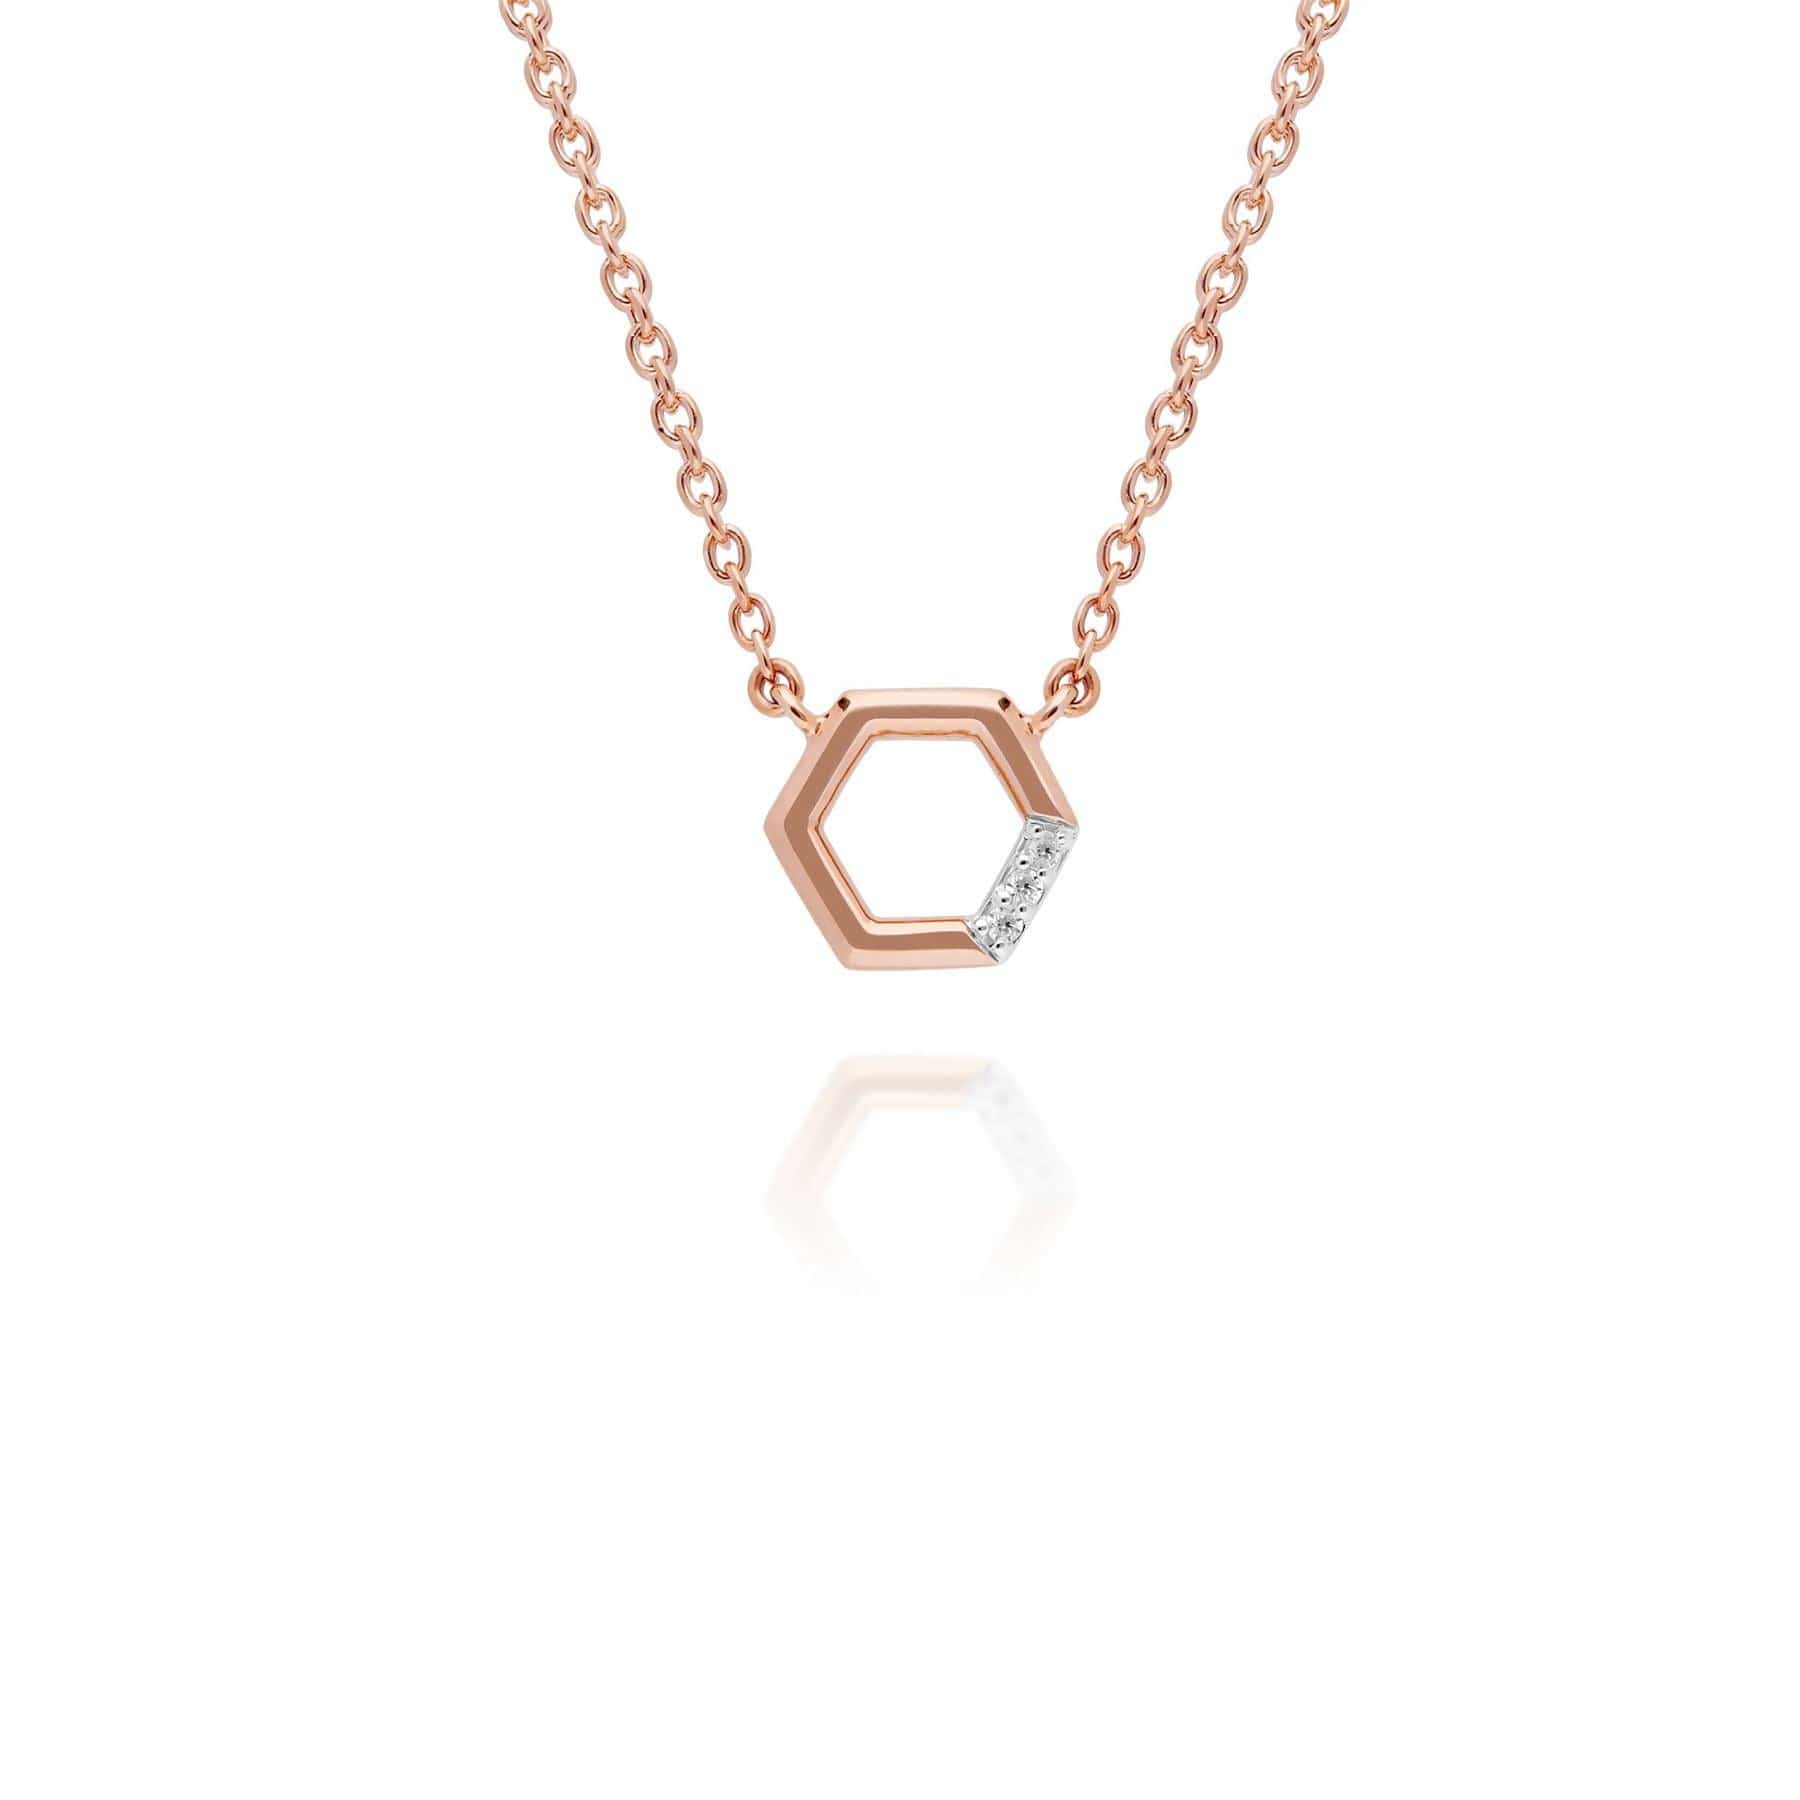 191N0230019-191R0906019 Diamond Pave Hexagon Necklace & Ring Set in 9ct Rose Gold 2